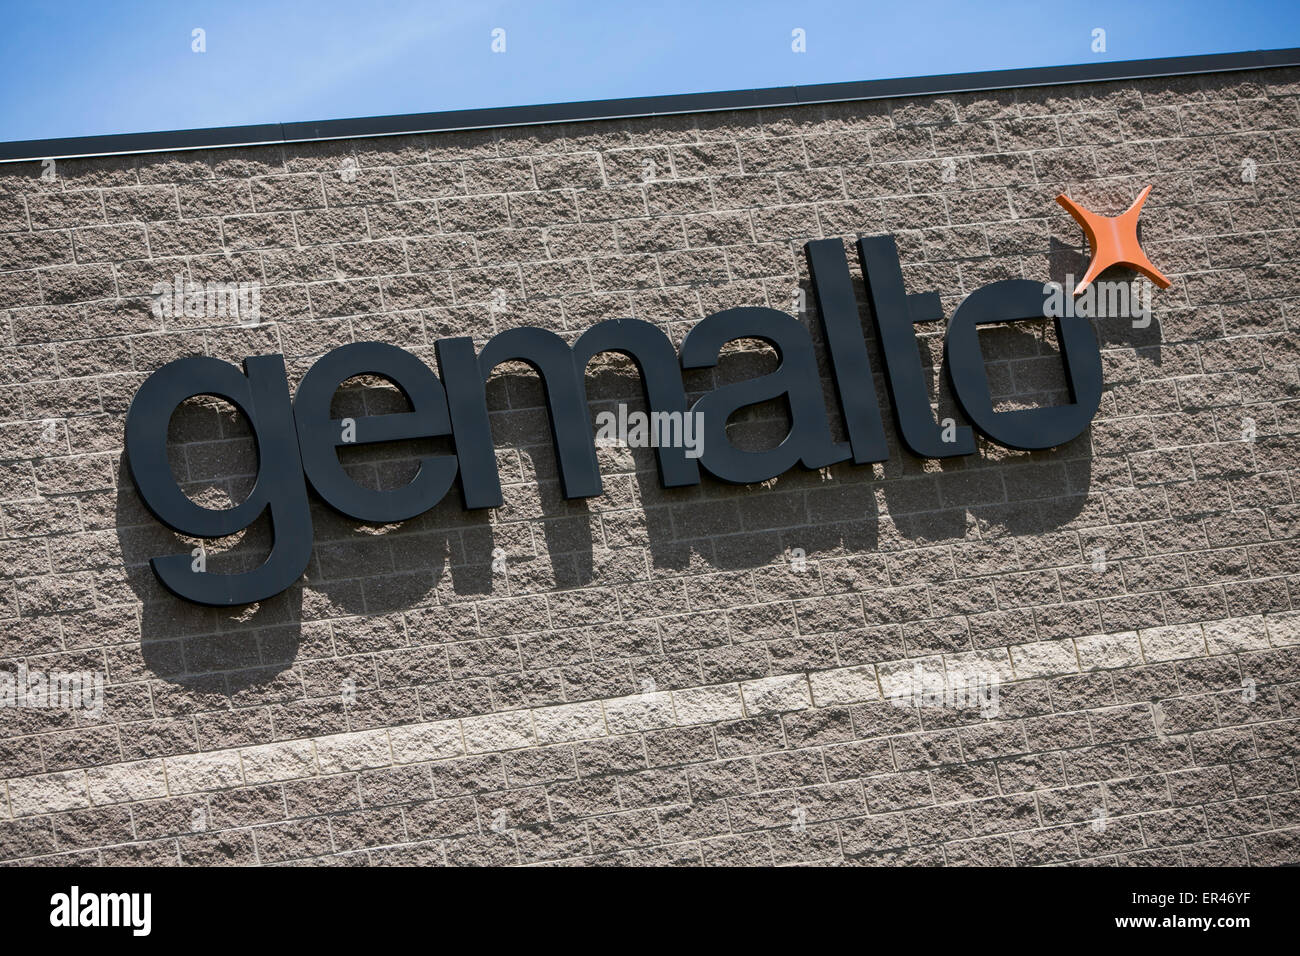 A logo sign outside of a facility operated by SIM card manufacturer Gemalto in Montgomeryville, Pennsylvania. Stock Photo